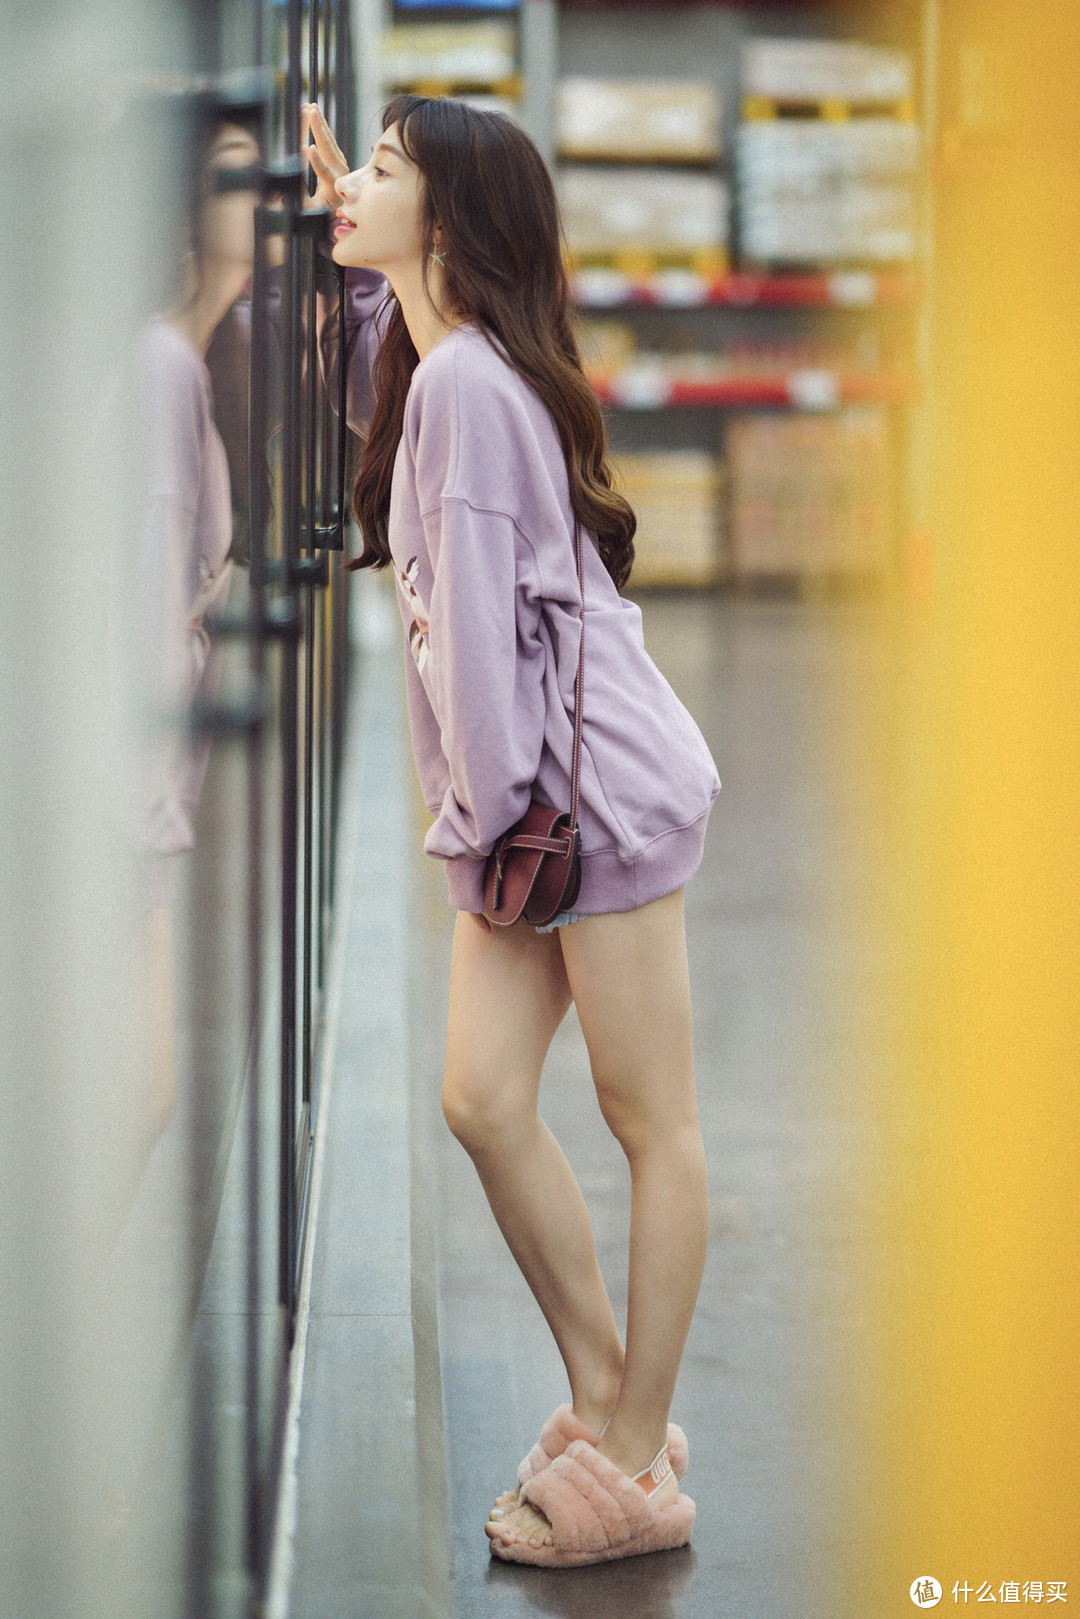 SONY ILCE-7RM3+FE 85MM F1.4 GM  1/160S F1.4  ISO400